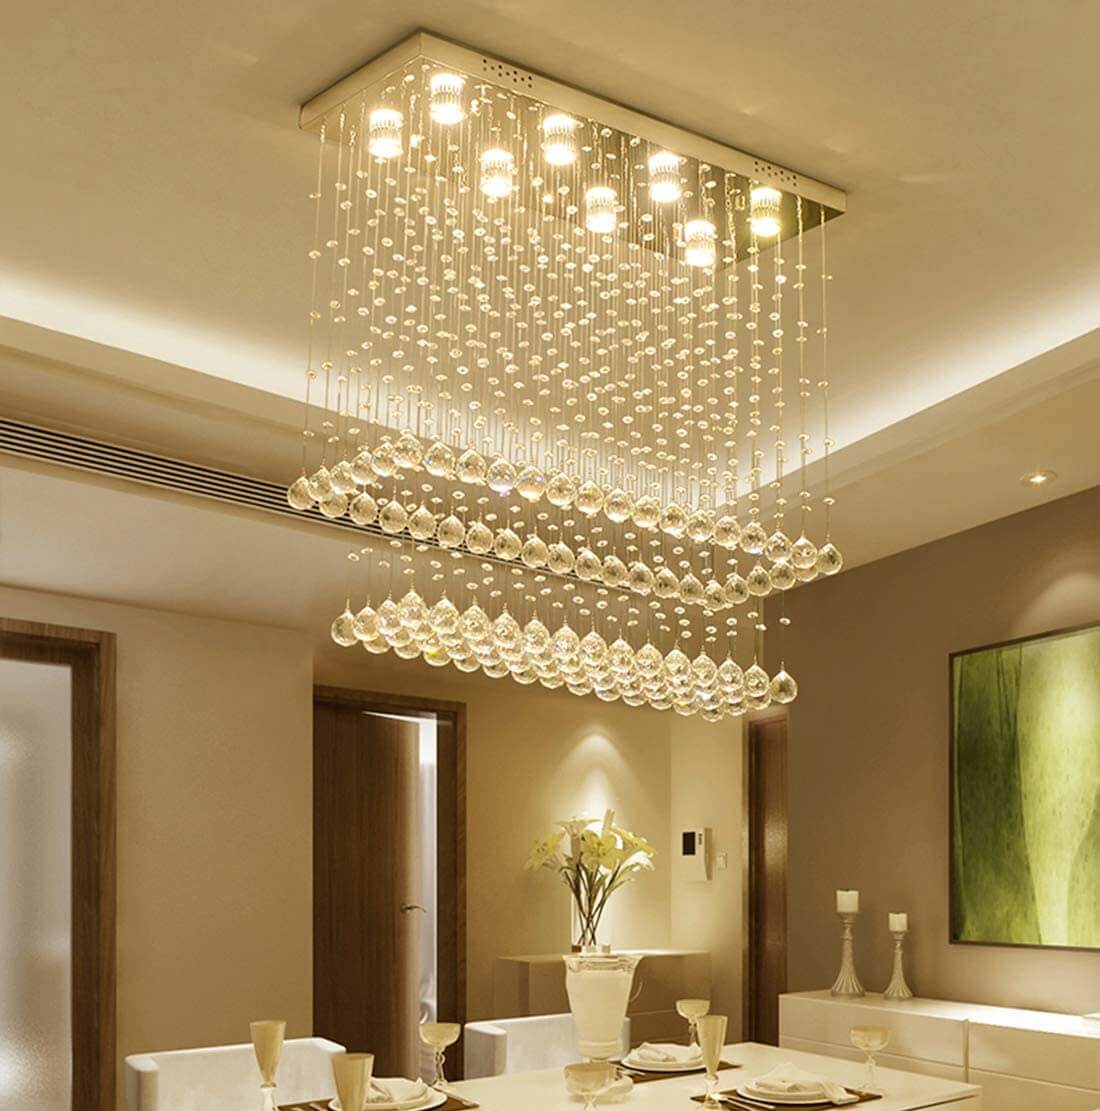 Moooni L31.5 Contemporary Rectangle Crystal Chandelier Modern Dining Room Ceiling Light Fixture RainDrop Design 